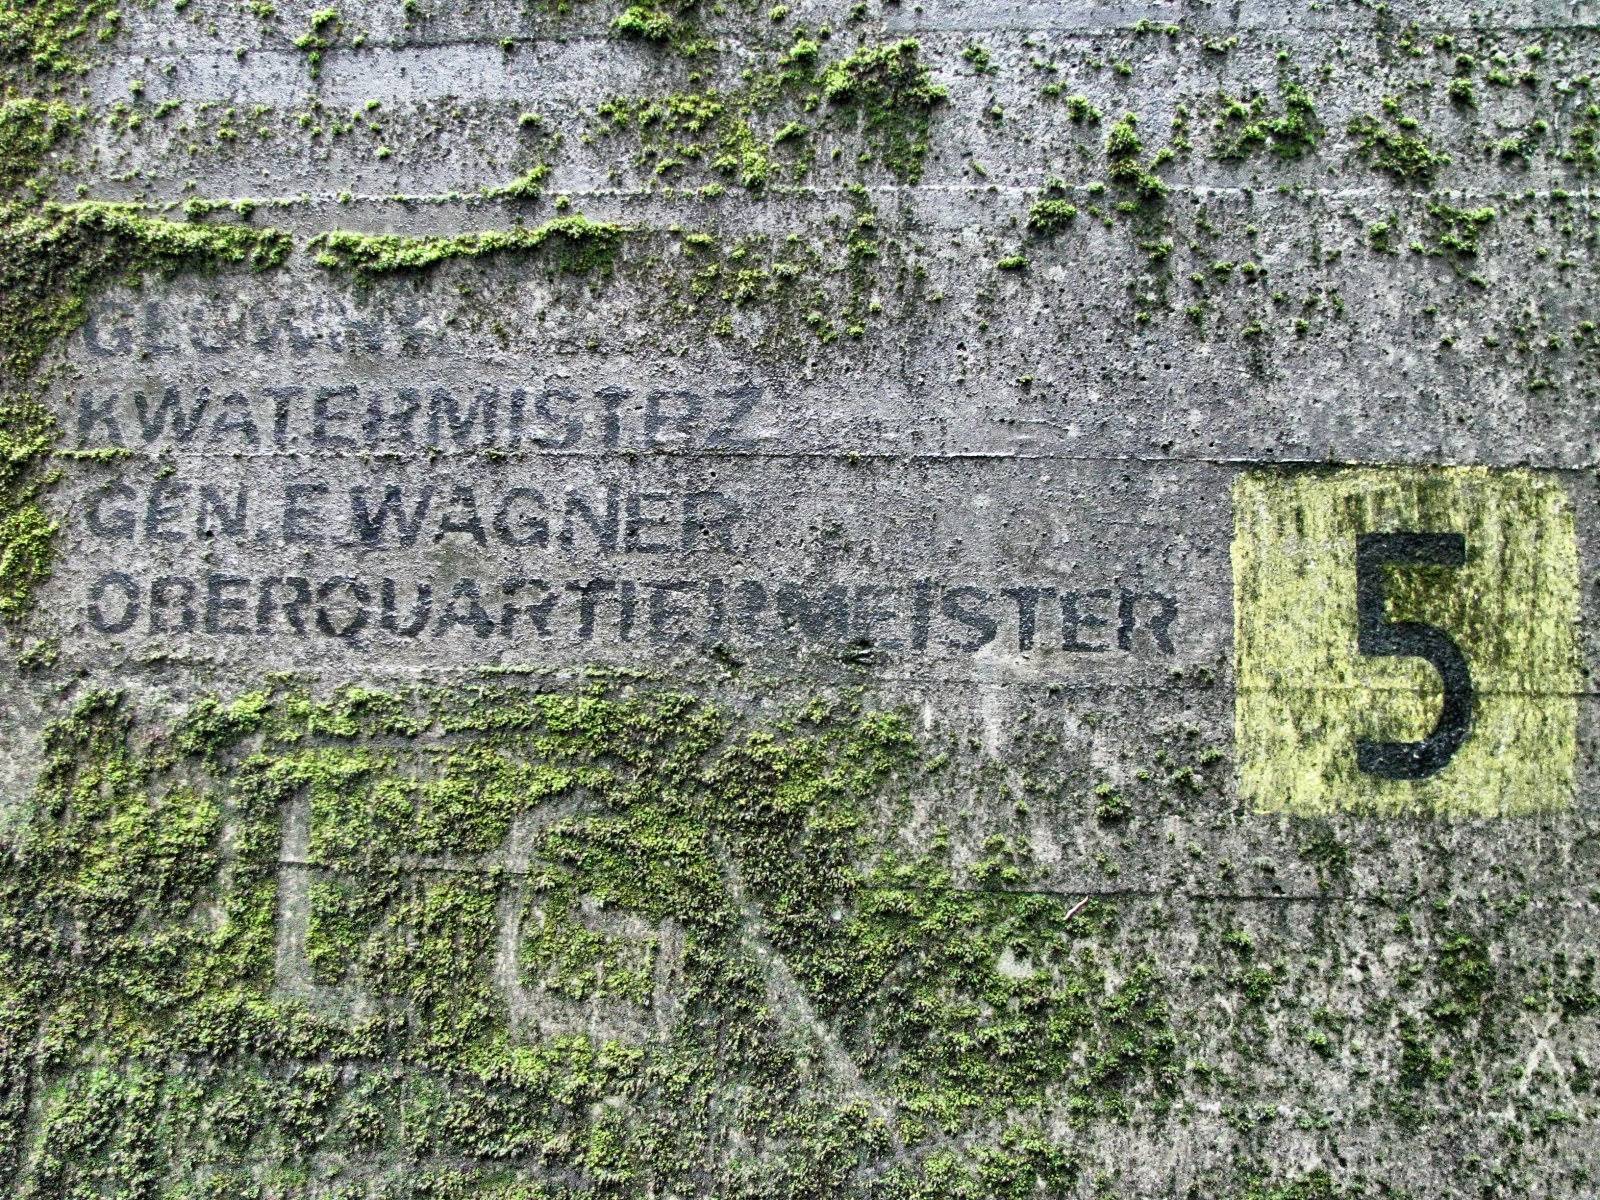 The building of the ”Oberquartiermeister” Gen. Wagner